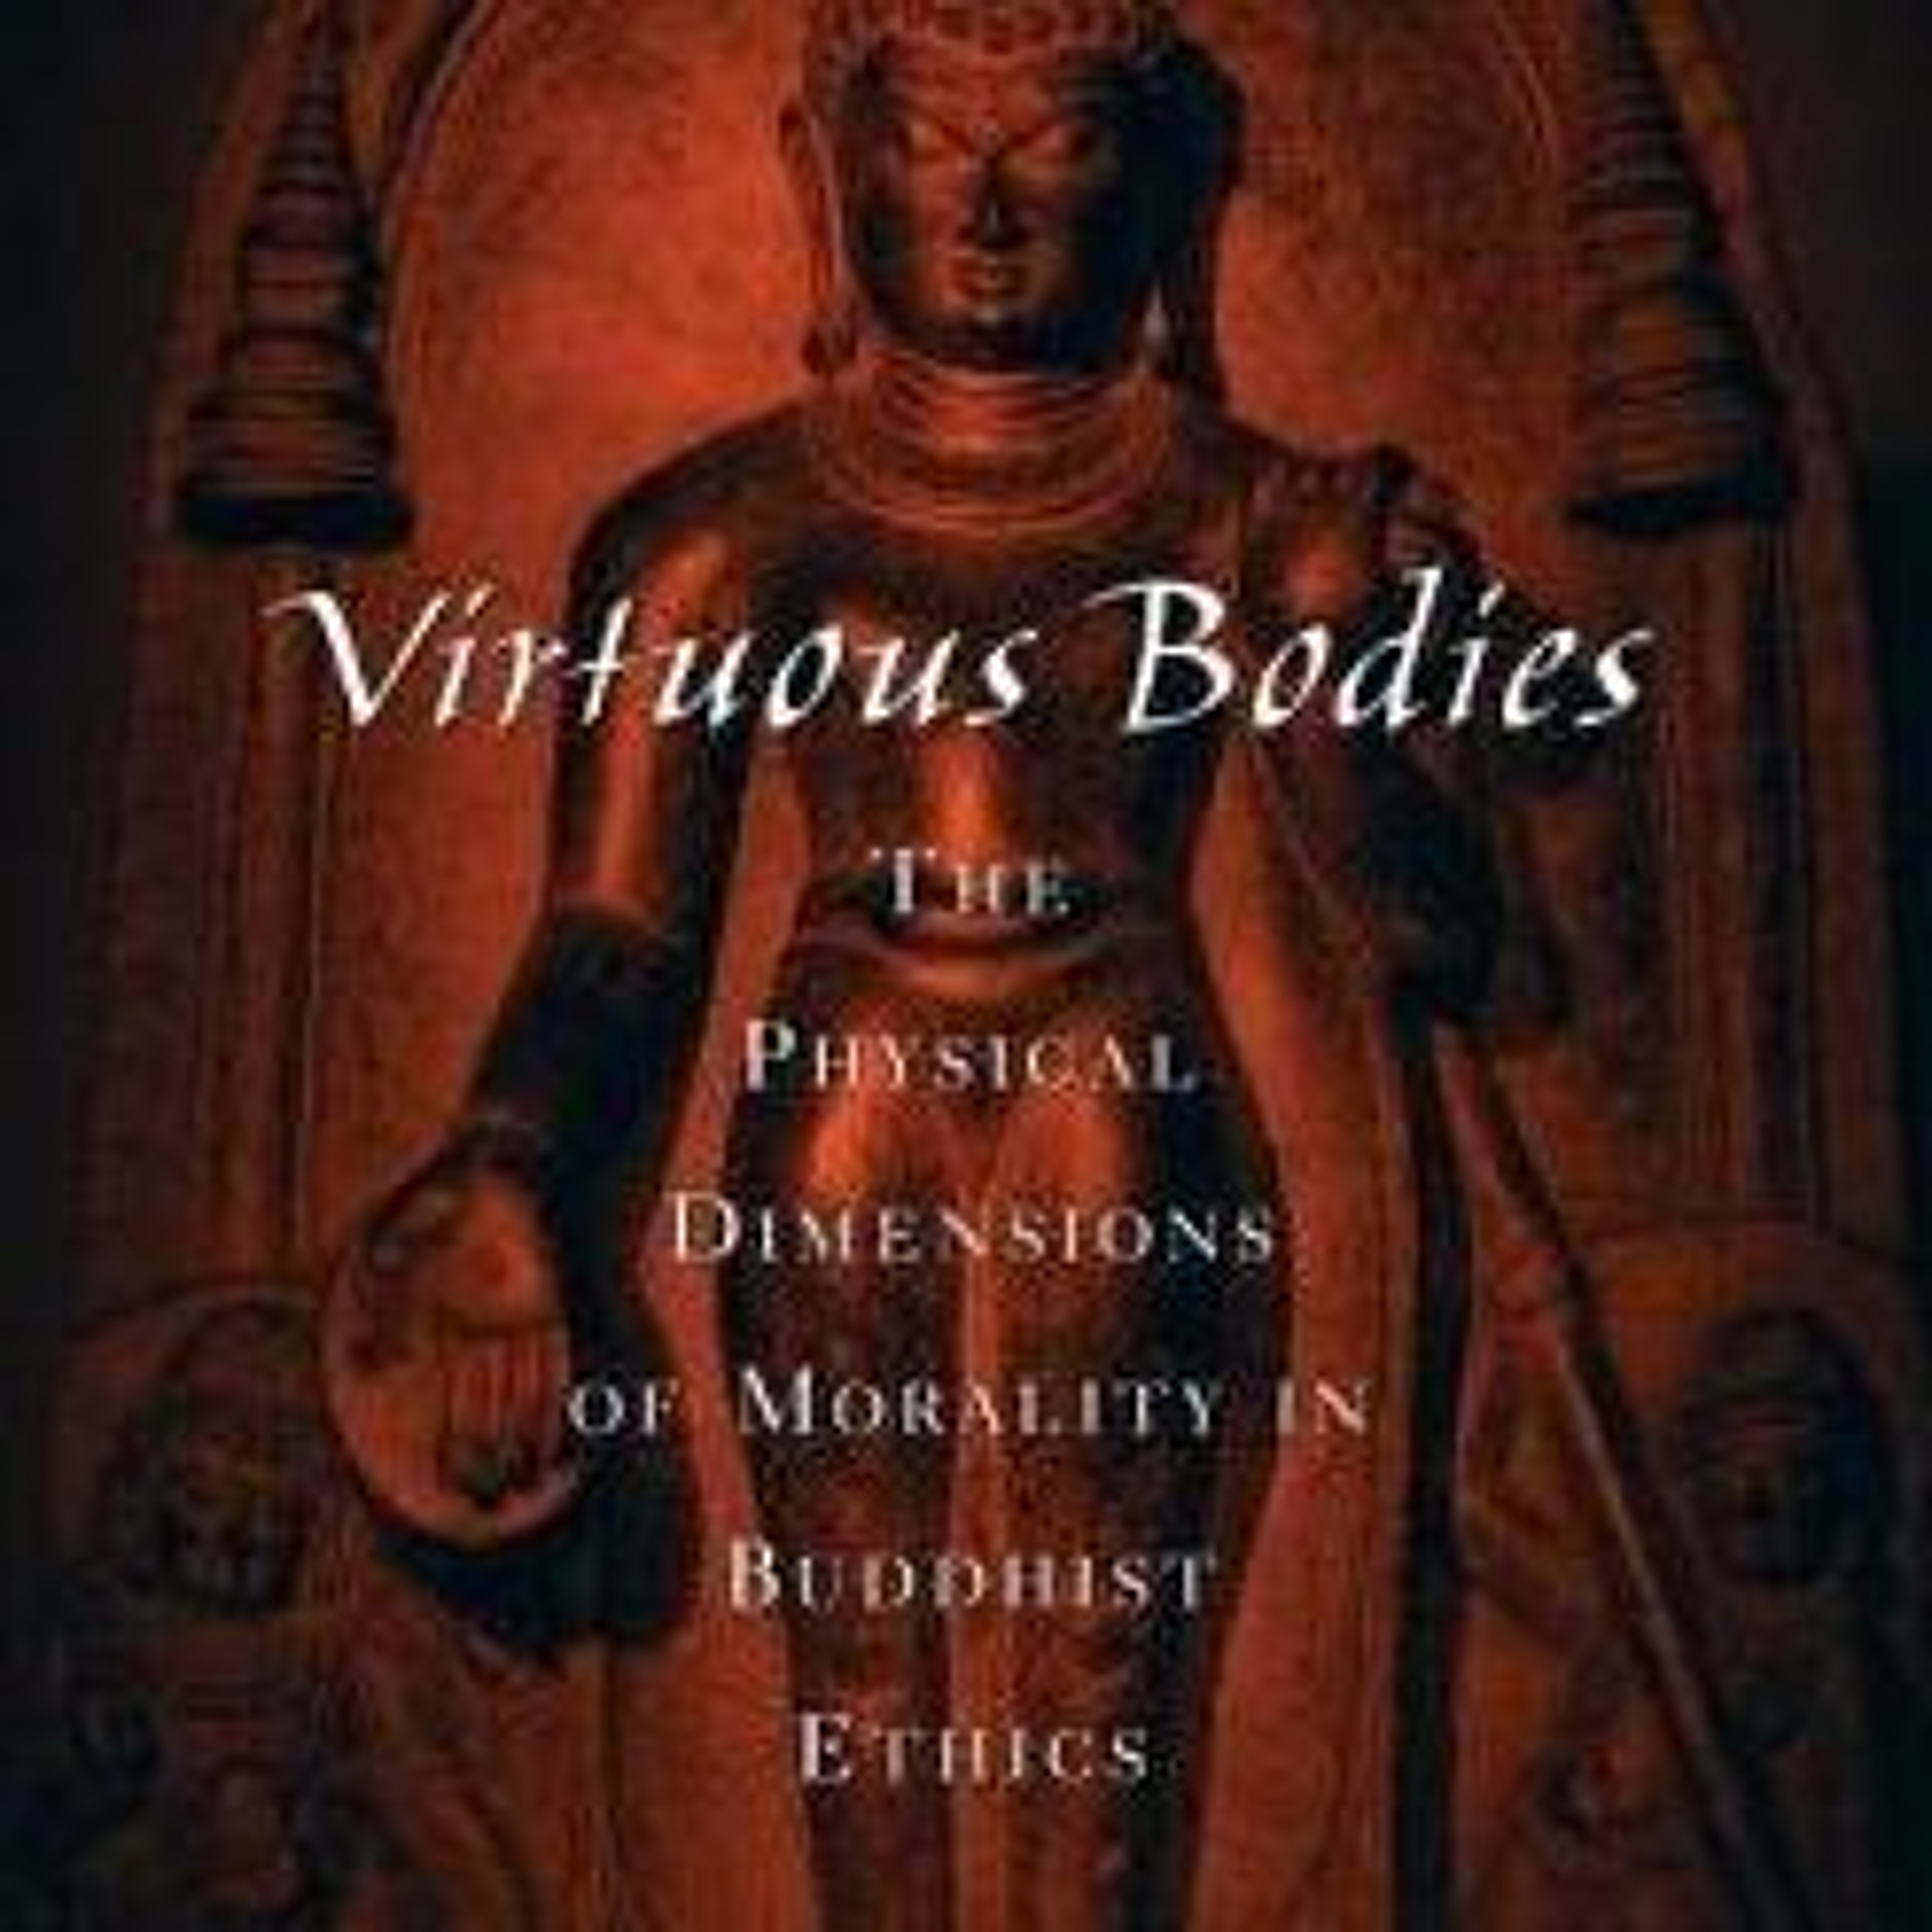 Footnotes for “Virtuous Bodies: The Physical Dimensions of Morality in Buddhist Ethics"